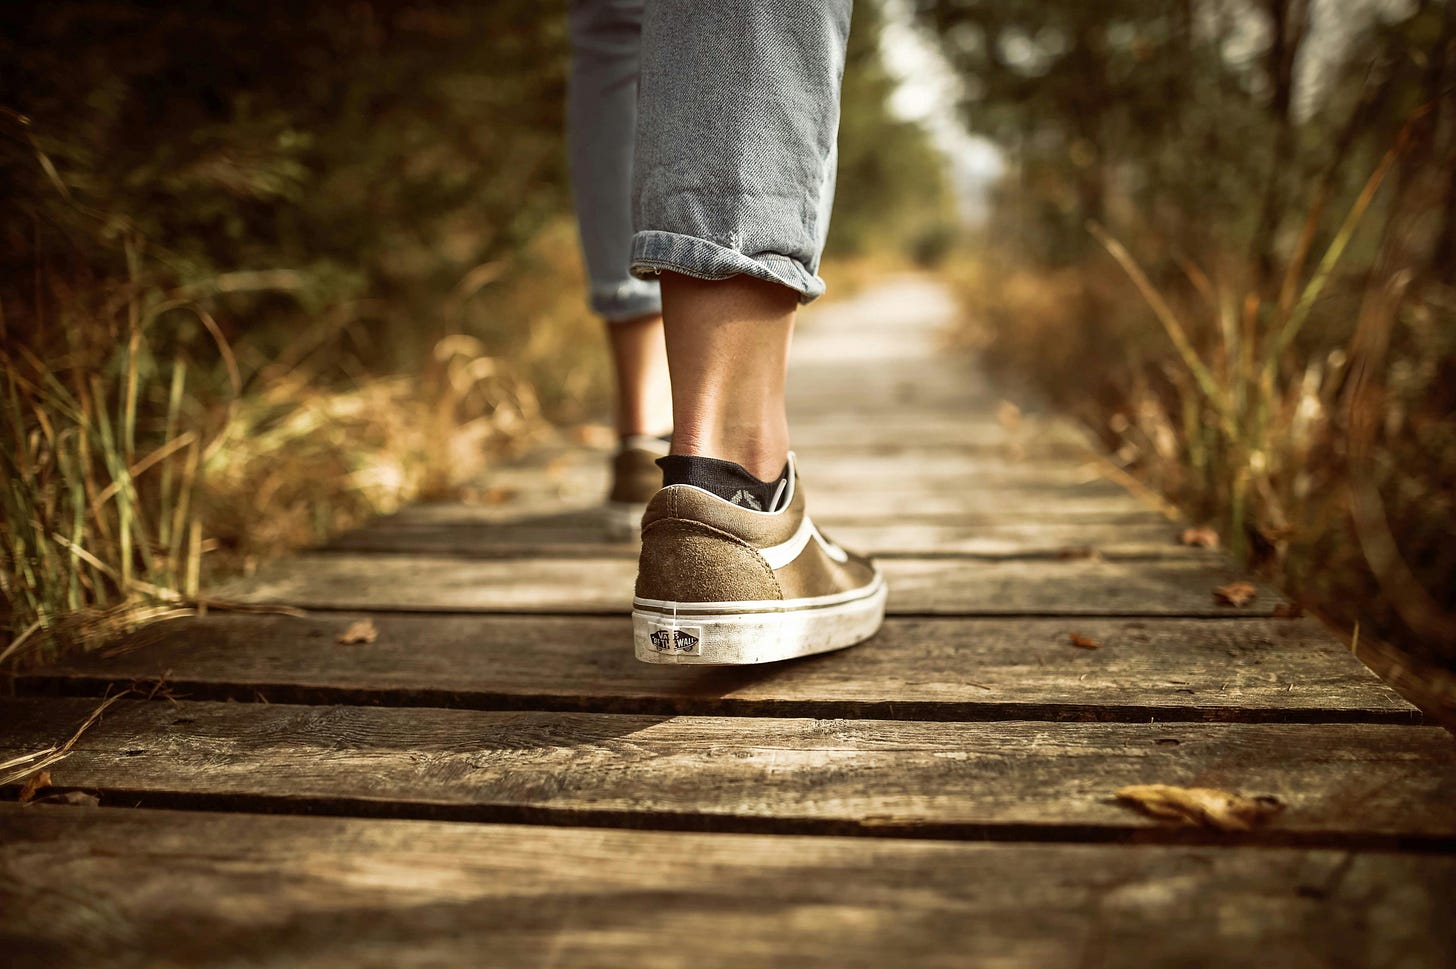 person in vans tennis shoes walking a wooden boardwalk path in the nature